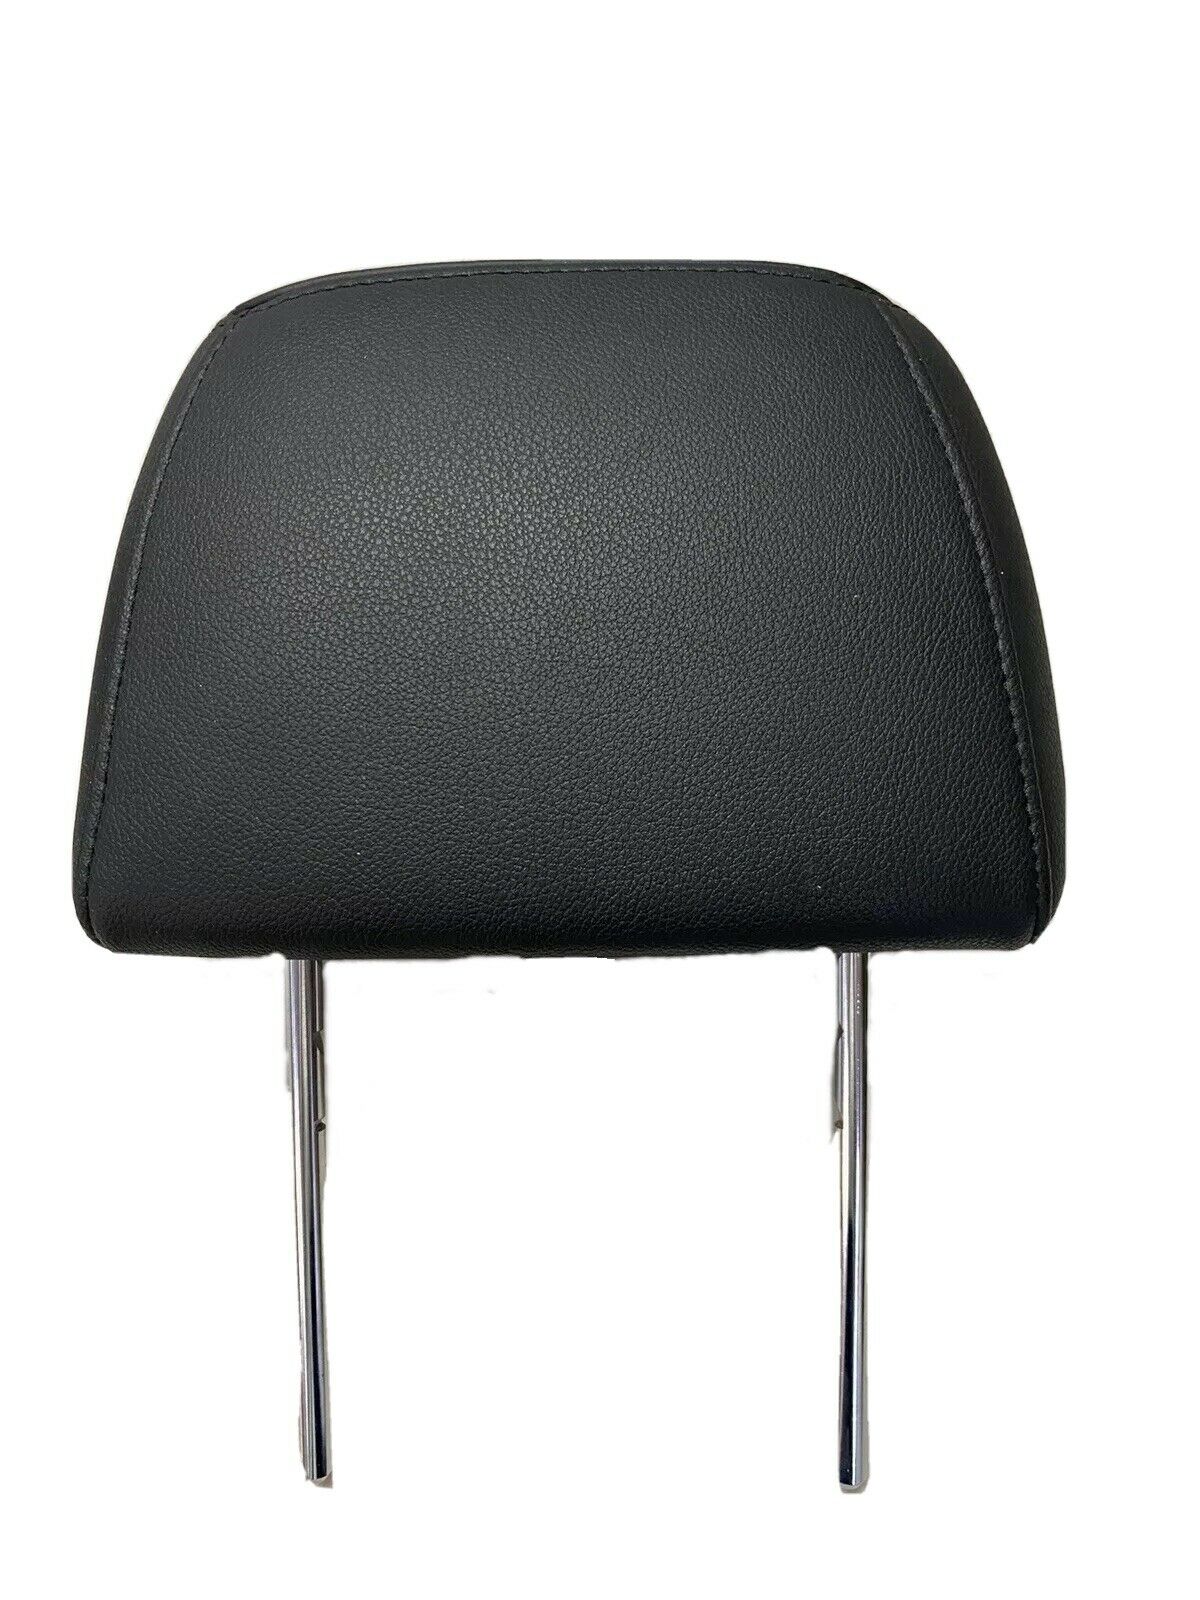 Holden Commodore VE Calais 2006-2013 Leather Headrest - All AutomotiveParts